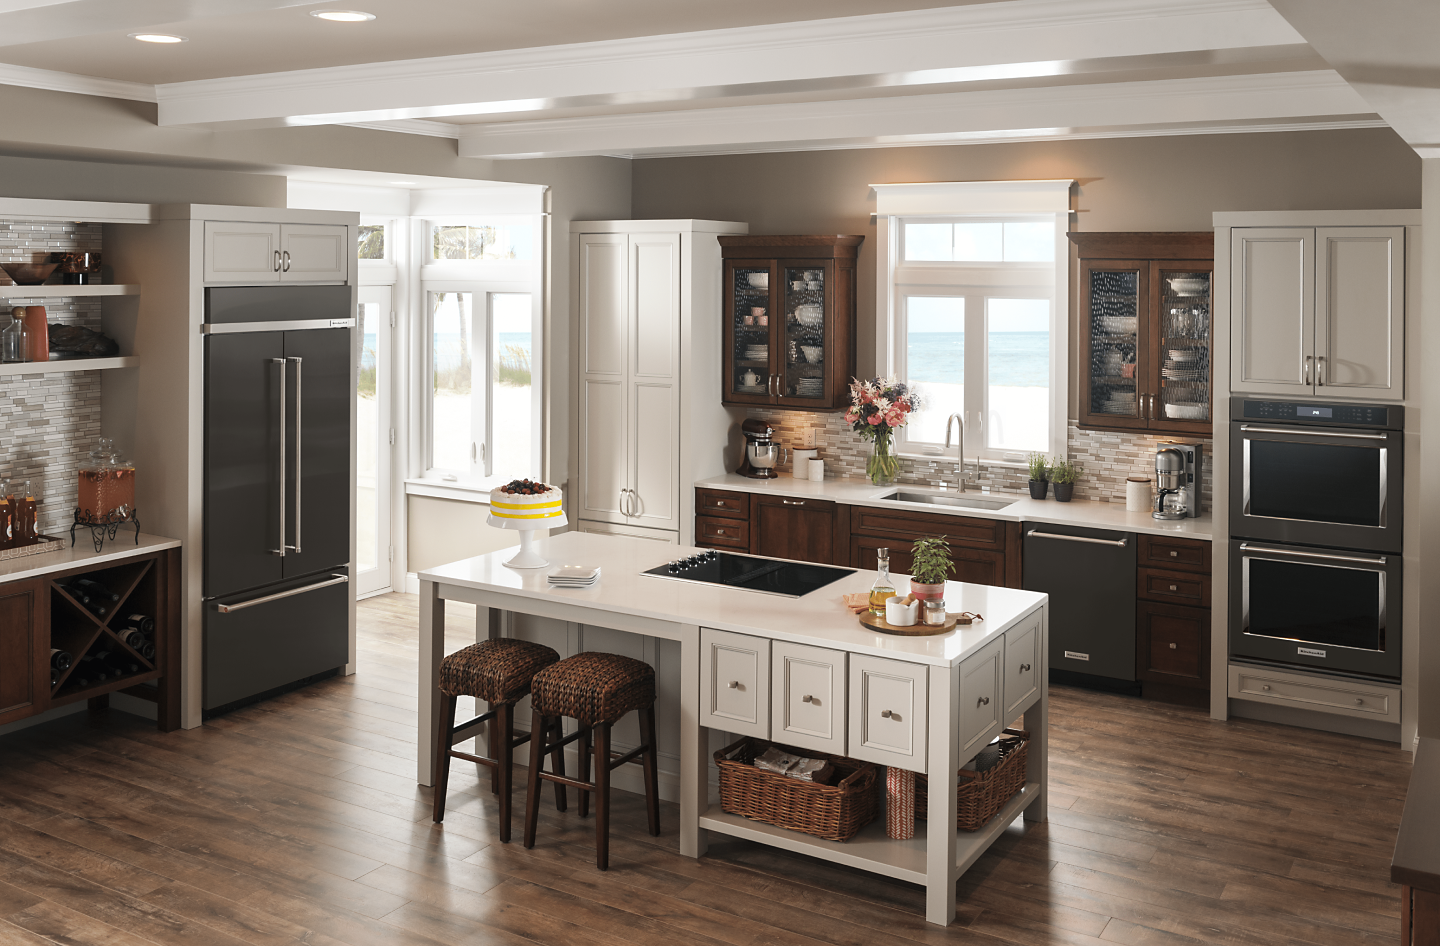 Best places to buy appliances